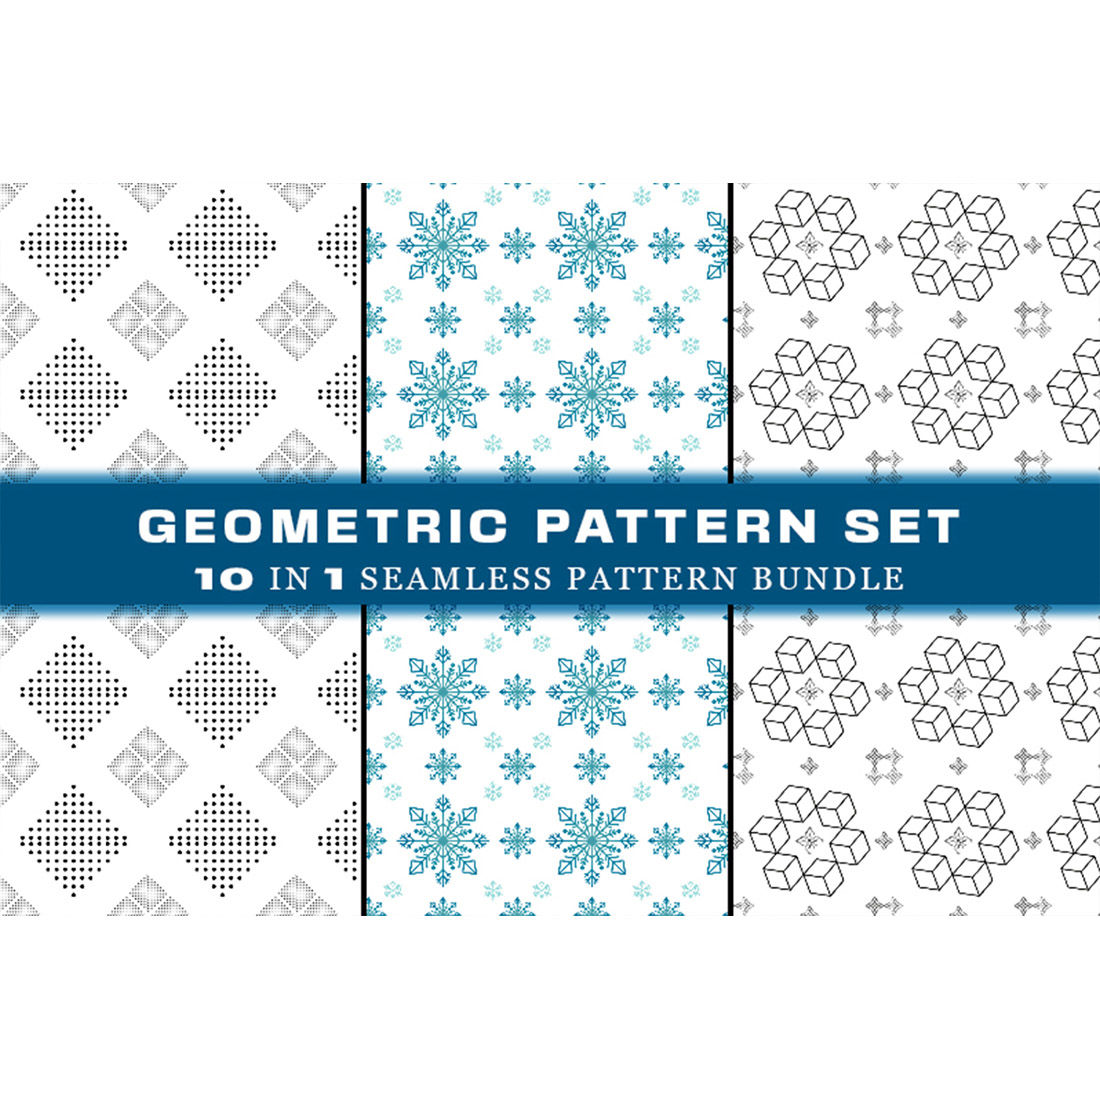 A selection of images of gorgeous geometric patterns